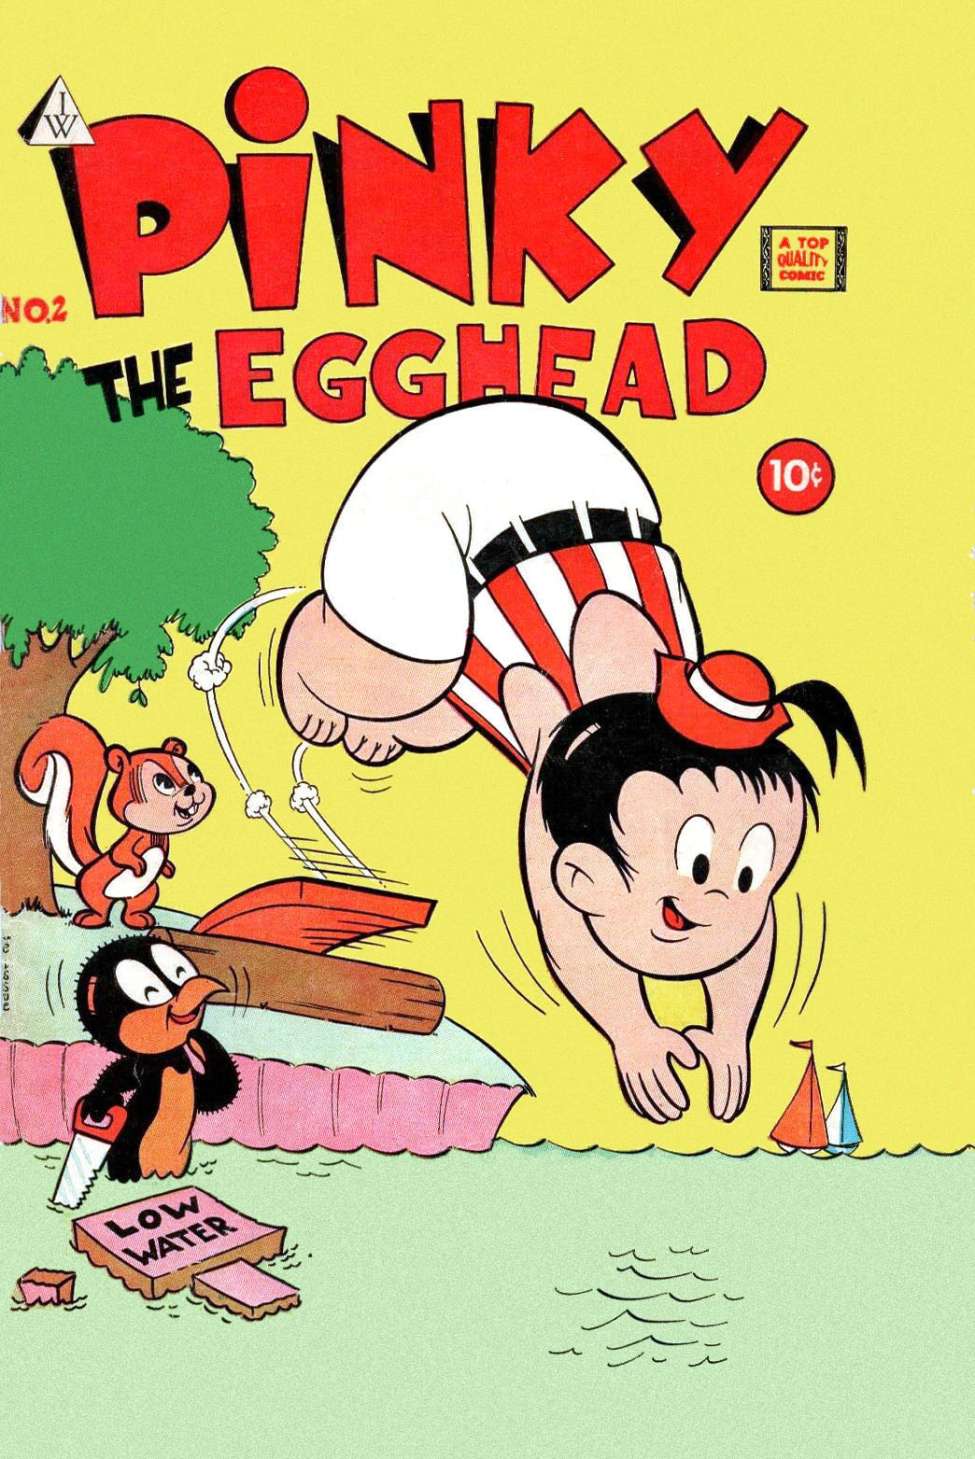 Book Cover For Pinky the Egghead 2